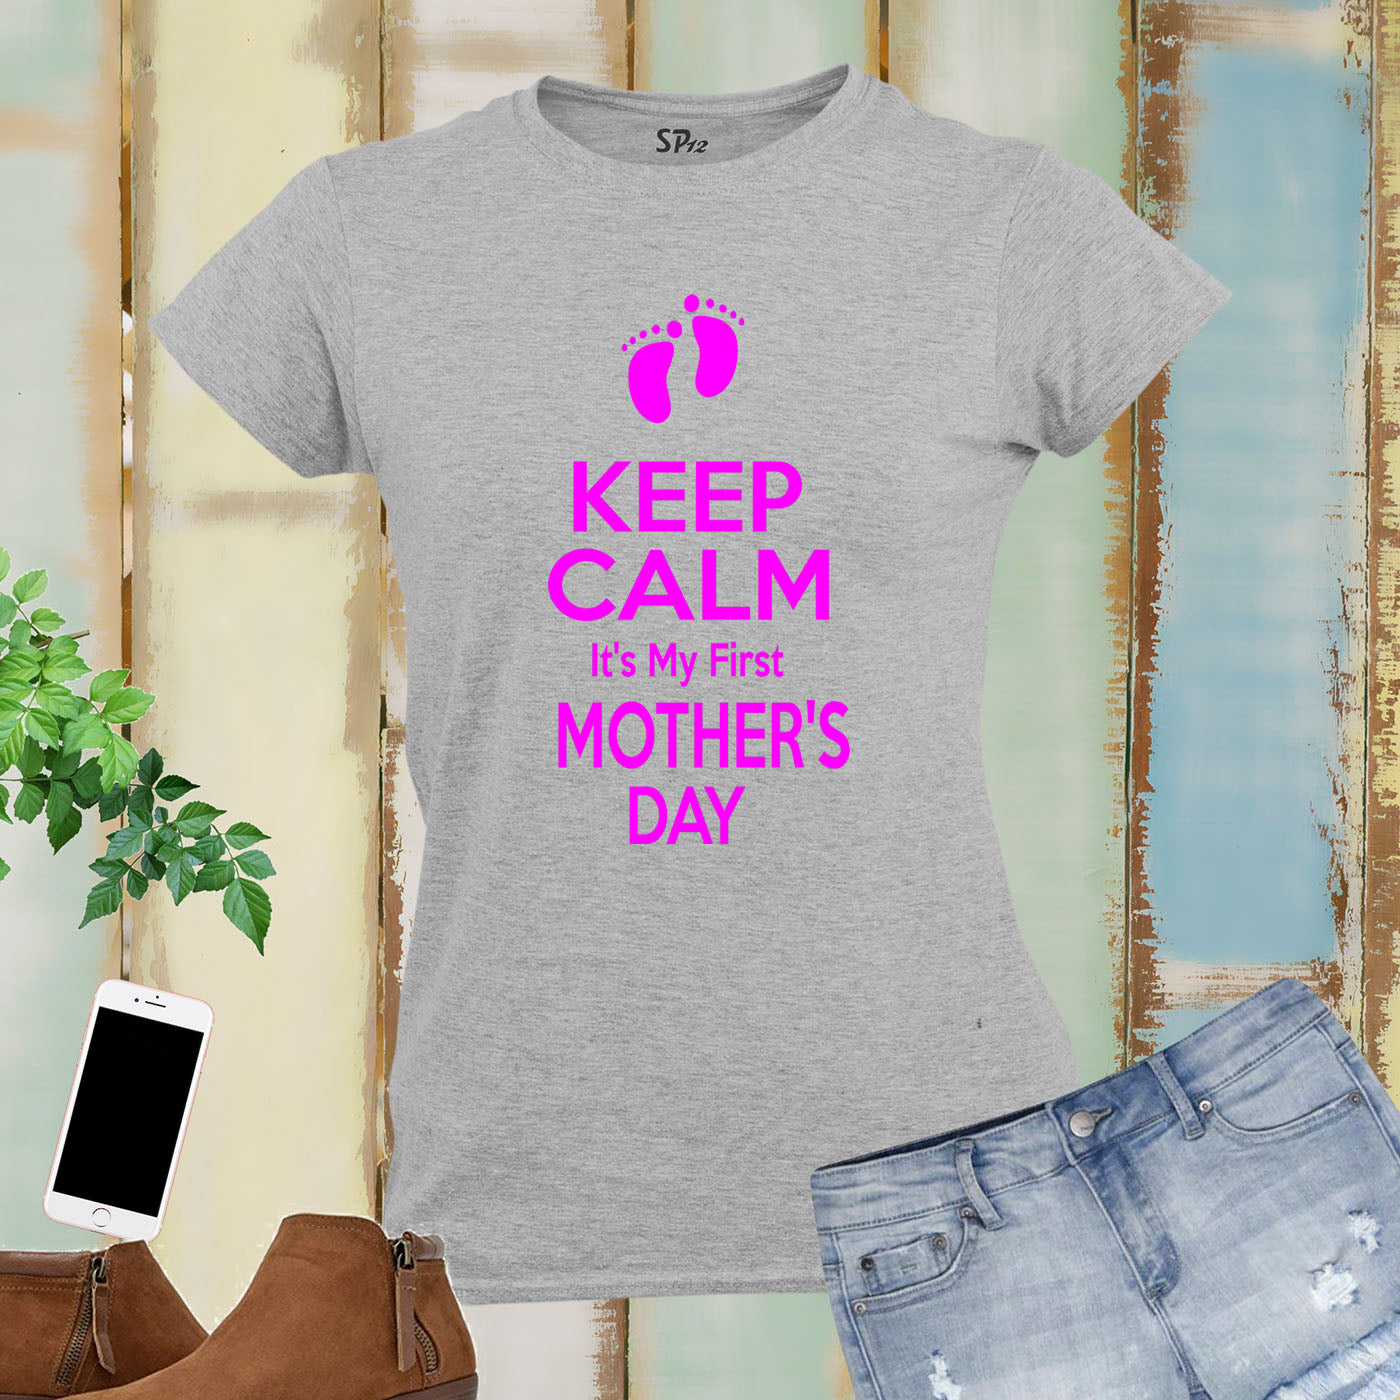 Family Women Mom T Shirt Keep Calm My First Mothers Day